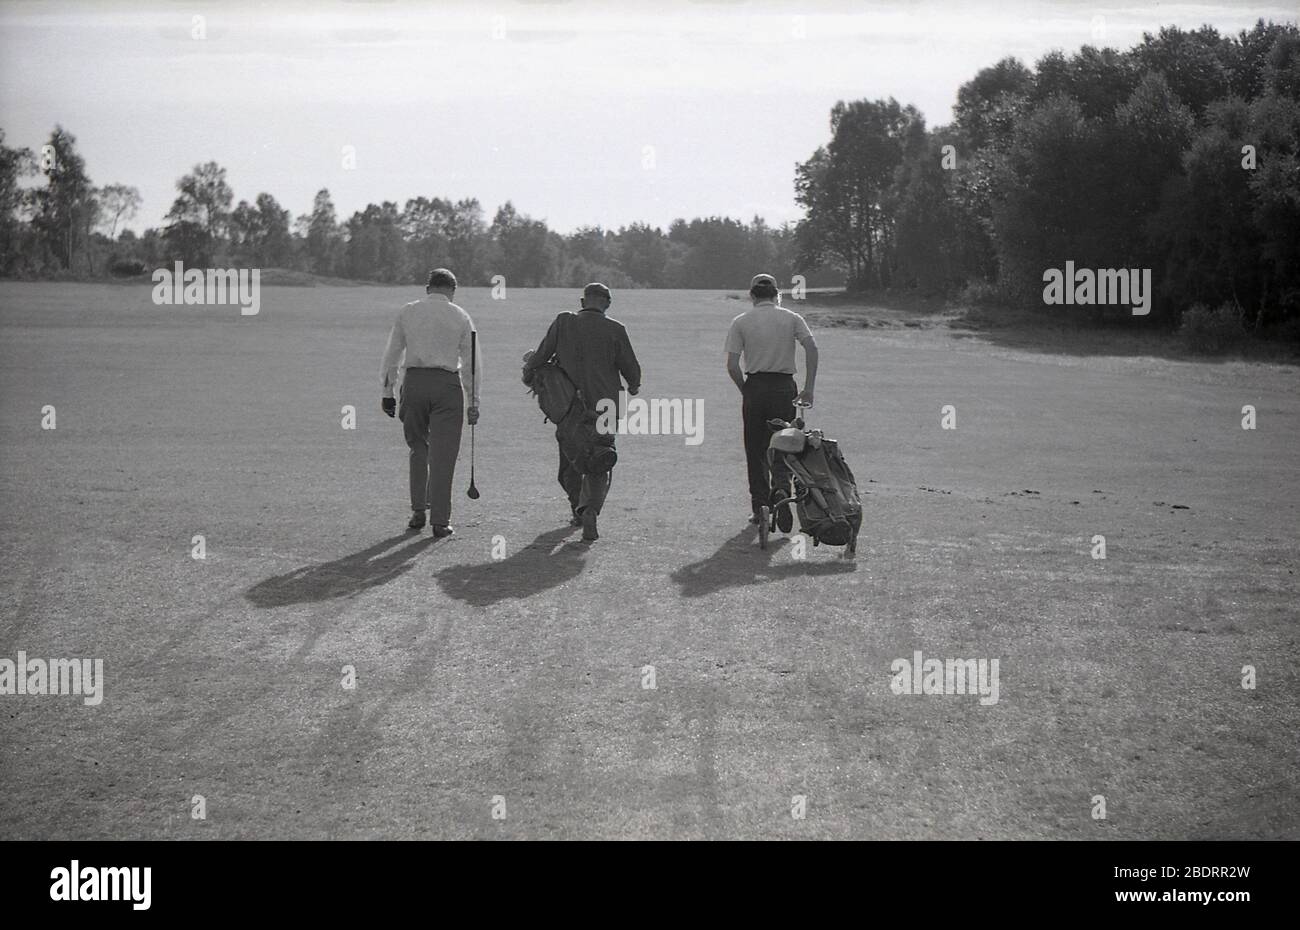 1960s, historical, on a golf course, in a line, three men walking down a fairway, two golfers and a caddie who is carrying clubs for one of them  and who is wearing a suit, while the other golfer is pulling a golf bag on a trolley of the era. Stock Photo